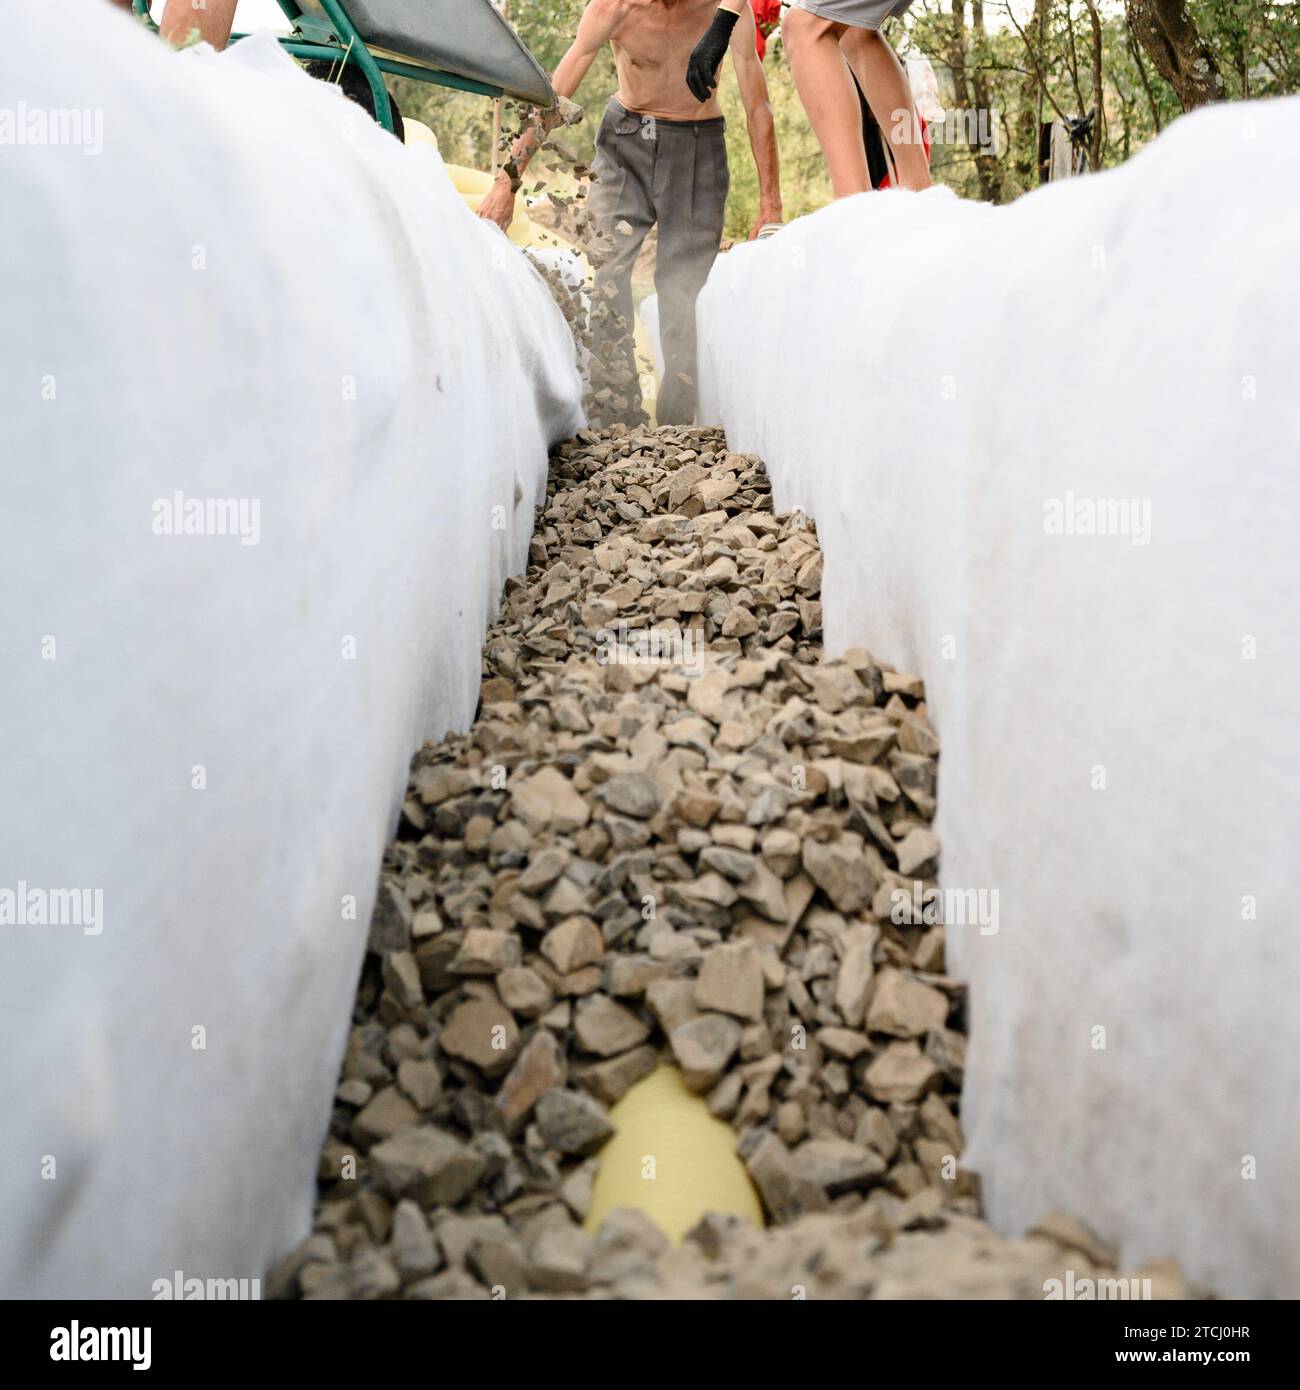 A man pours rubble crushed stone from a wheelbarrow into a trench. Drainage works for drainage of ground water around the field. Stock Photo